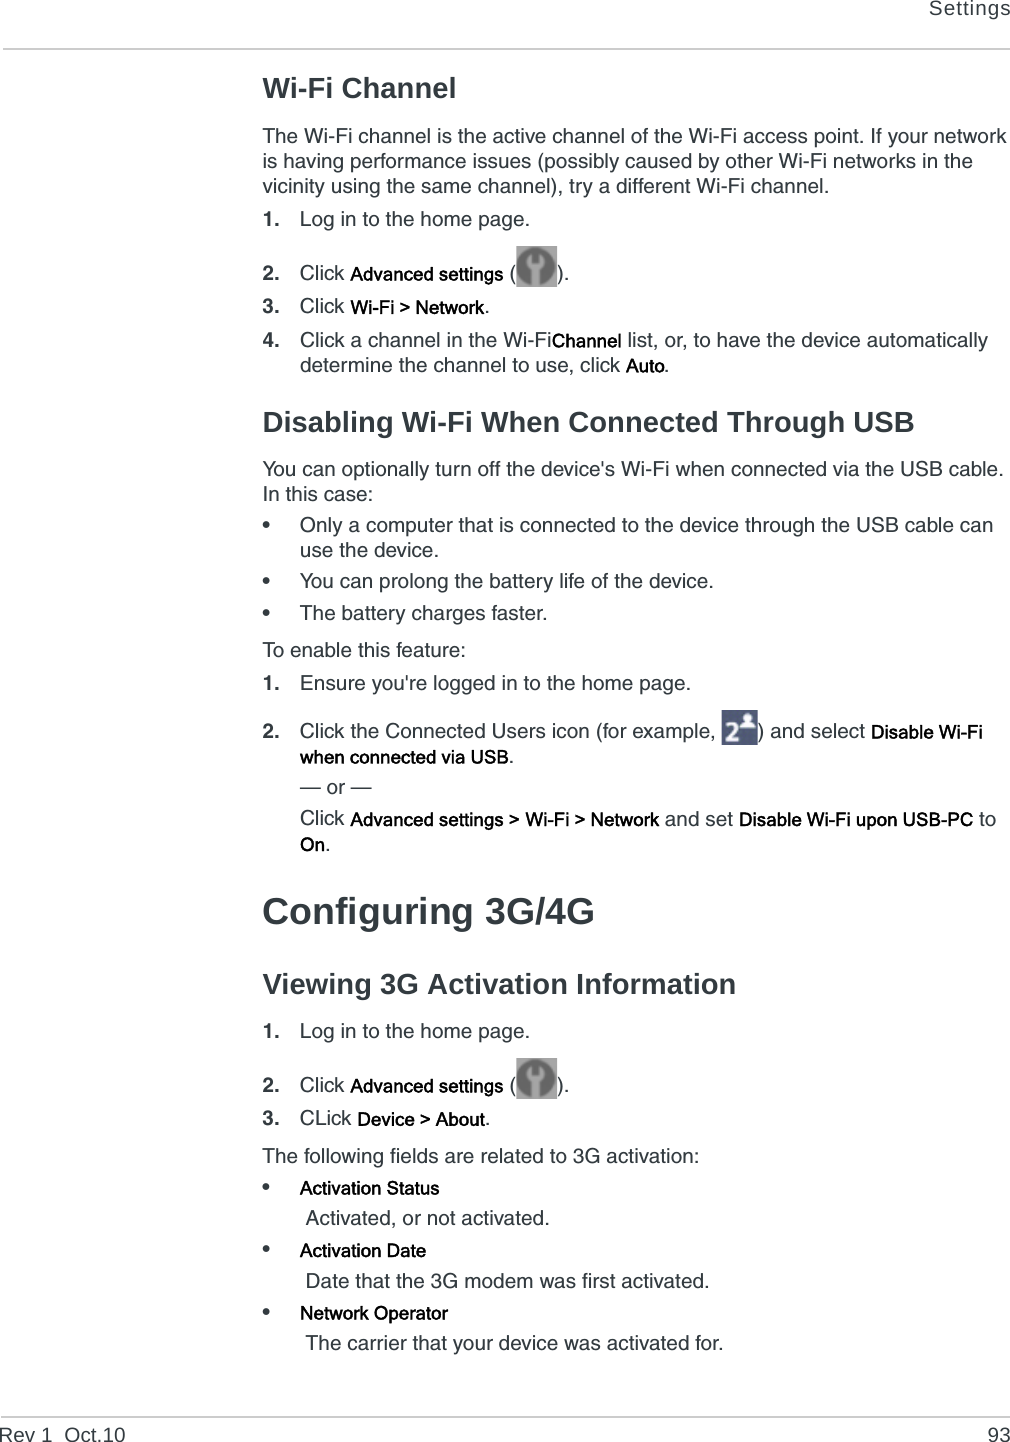 SettingsRev 1  Oct.10 93Wi-Fi ChannelThe Wi-Fi channel is the active channel of the Wi-Fi access point. If your network is having performance issues (possibly caused by other Wi-Fi networks in the vicinity using the same channel), try a different Wi-Fi channel.1. Log in to the home page.2. Click Advanced settings ().3. Click Wi-Fi &gt; Network.4. Click a channel in the Wi-FiChannel list, or, to have the device automatically determine the channel to use, click Auto.Disabling Wi-Fi When Connected Through USBYou can optionally turn off the device&apos;s Wi-Fi when connected via the USB cable. In this case:•Only a computer that is connected to the device through the USB cable can use the device.•You can prolong the battery life of the device.•The battery charges faster.To enable this feature:1. Ensure you&apos;re logged in to the home page.2. Click the Connected Users icon (for example,  ) and select Disable Wi-Fi when connected via USB.— or —Click Advanced settings &gt; Wi-Fi &gt; Network and set Disable Wi-Fi upon USB-PC to On.Configuring 3G/4GViewing 3G Activation Information1. Log in to the home page.2. Click Advanced settings ().3. CLick Device &gt; About.The following fields are related to 3G activation:•Activation Status Activated, or not activated.•Activation Date Date that the 3G modem was first activated.•Network Operator The carrier that your device was activated for.